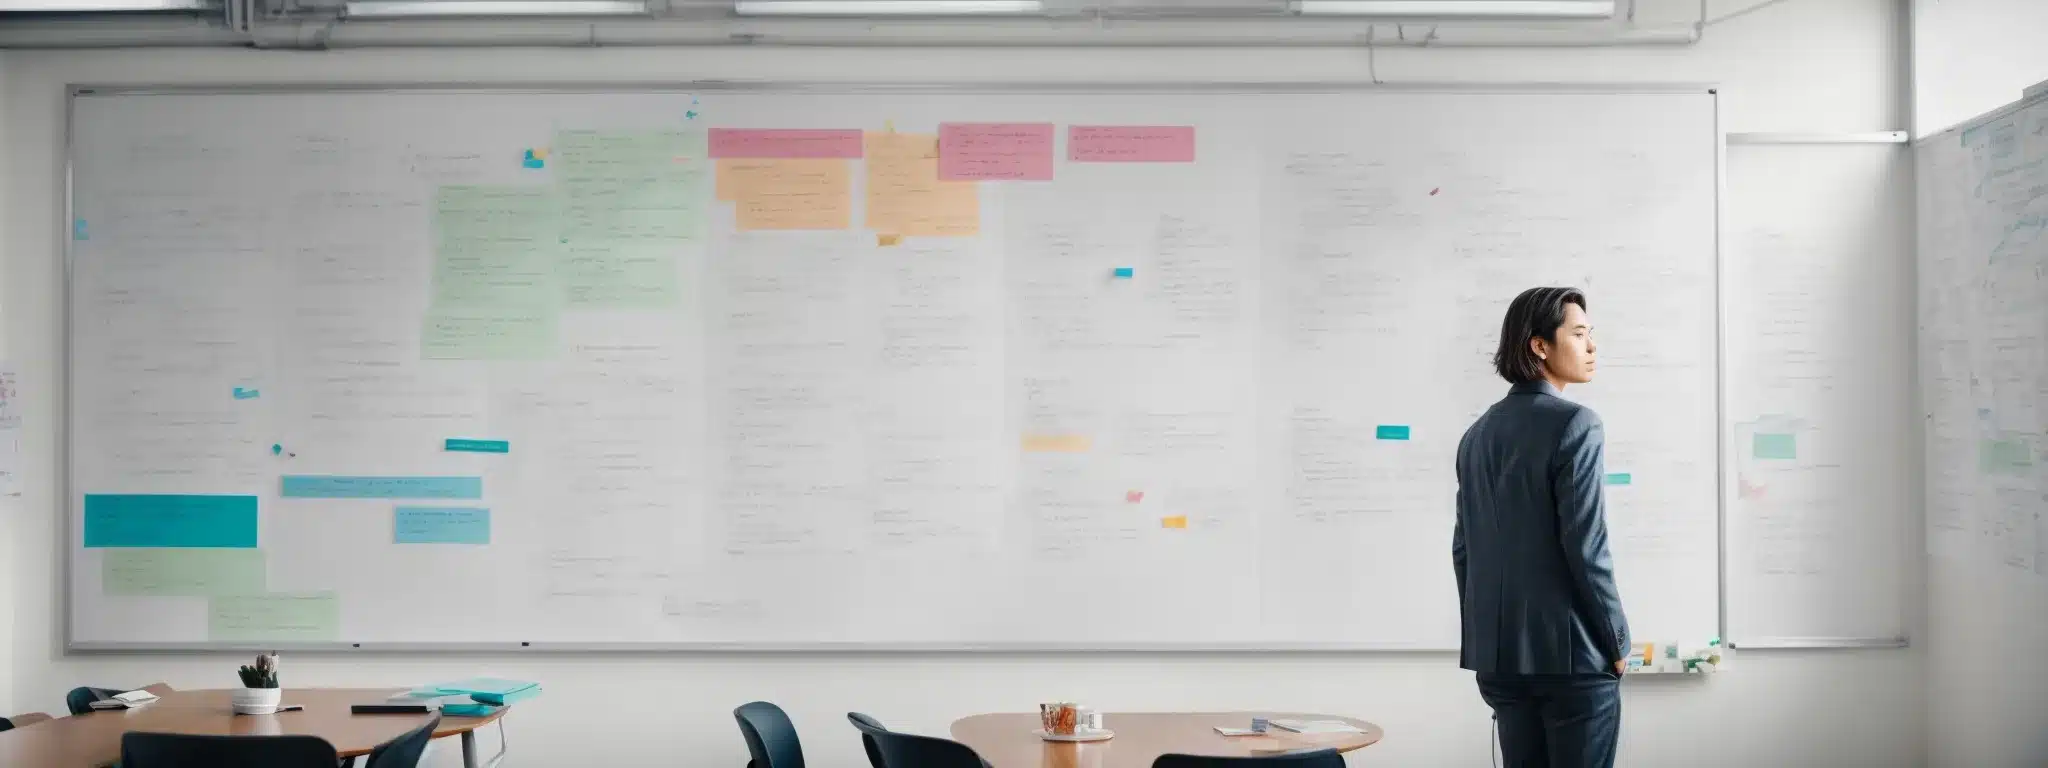 A Person Stands Before An Expansive Whiteboard, Covered In A Vibrant Array Of Strategies And Content Plans.